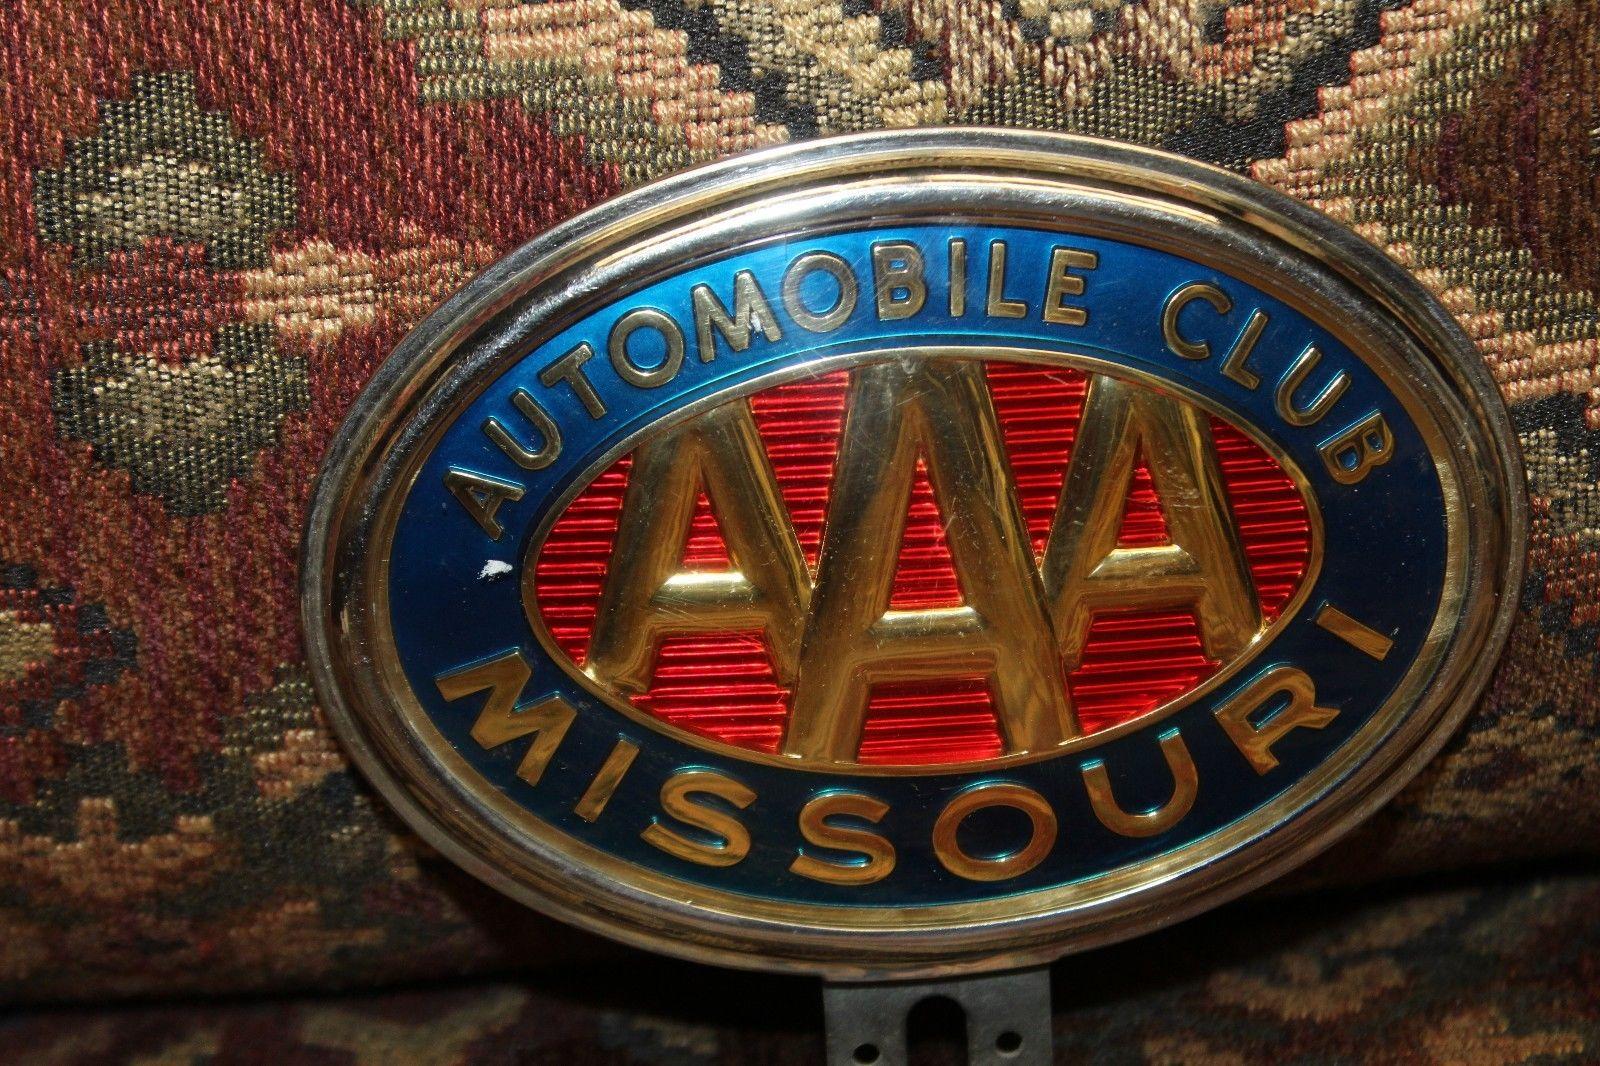 Mid-20th Century Original AAA Automobile Club Missouri Vintage License Plate Topper For Sale